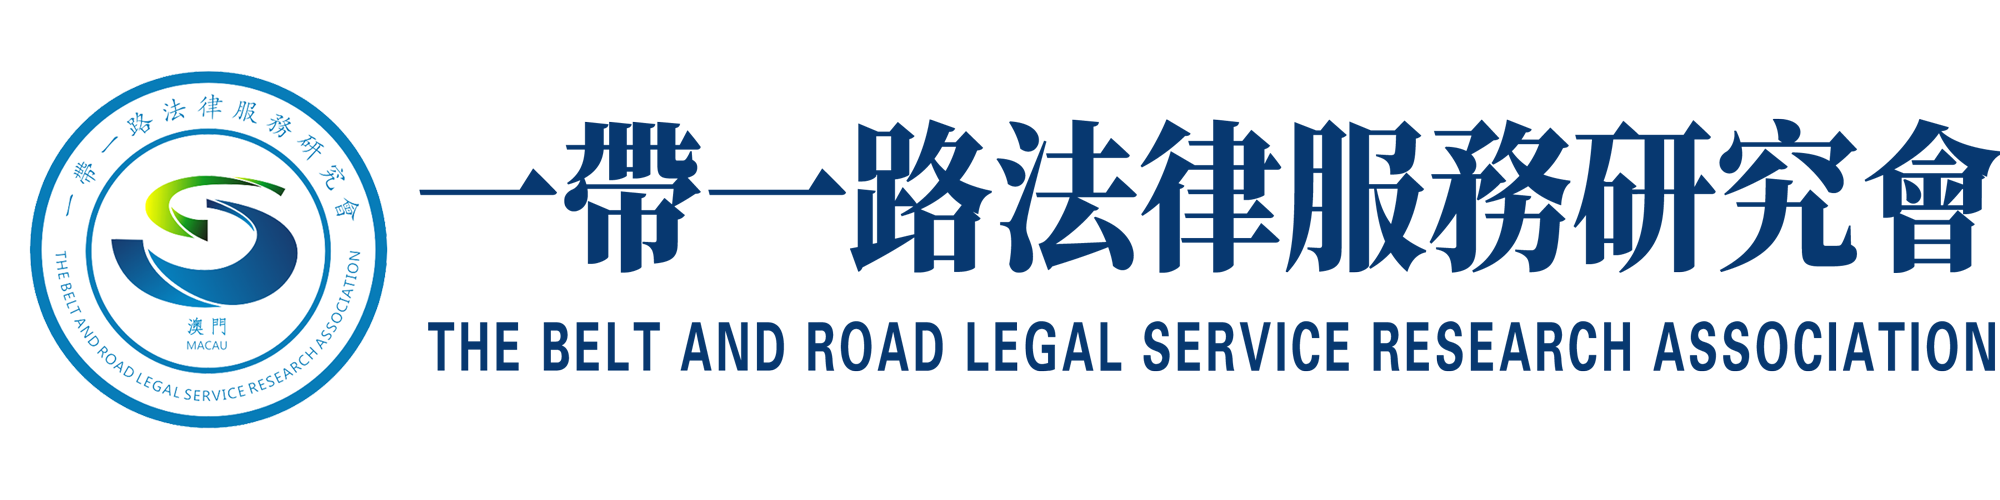 The Belt and Road Legal Services Research Association